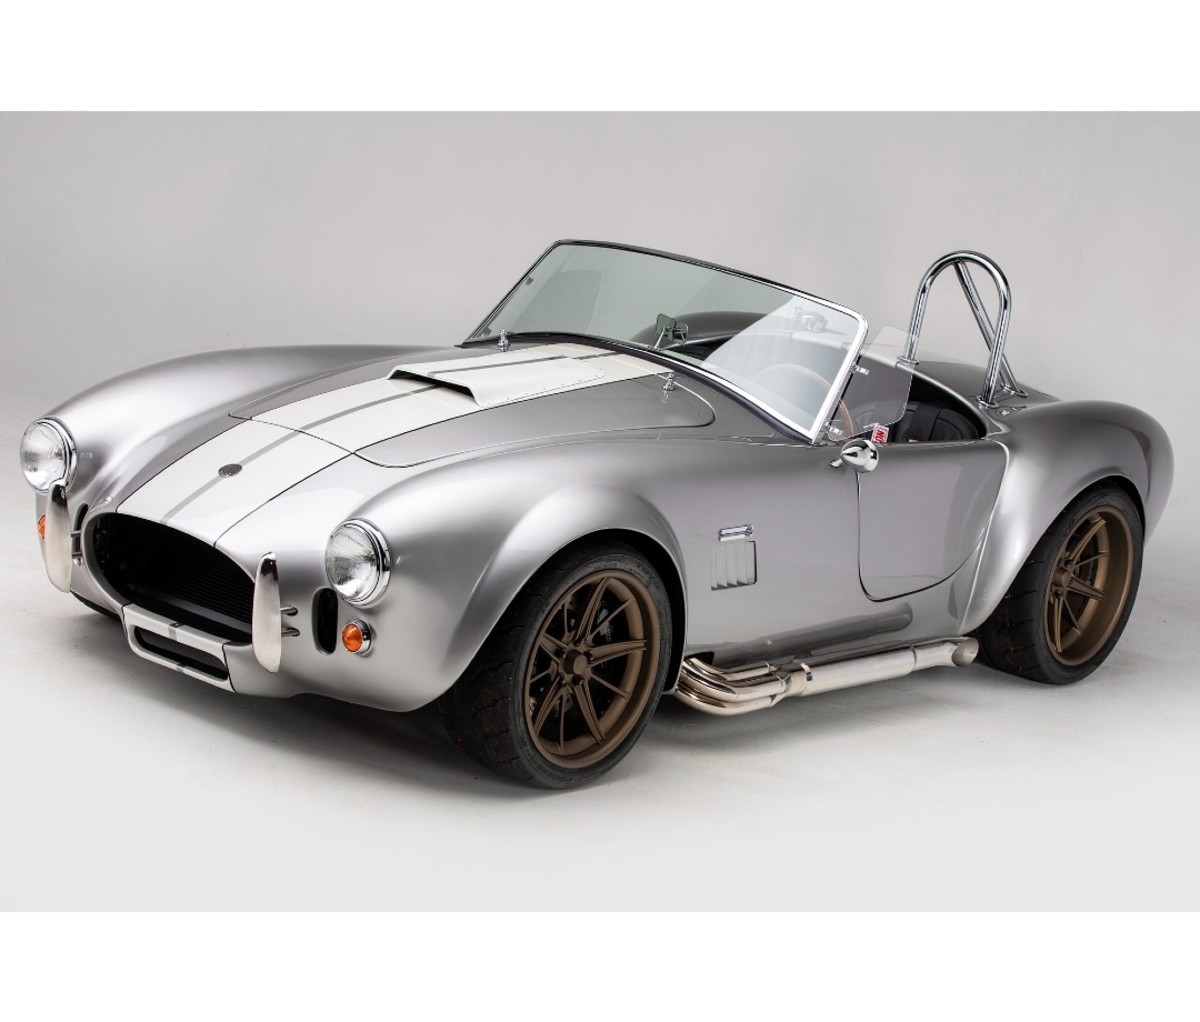 Factory Five makes build-your-own supercars and hot rods.